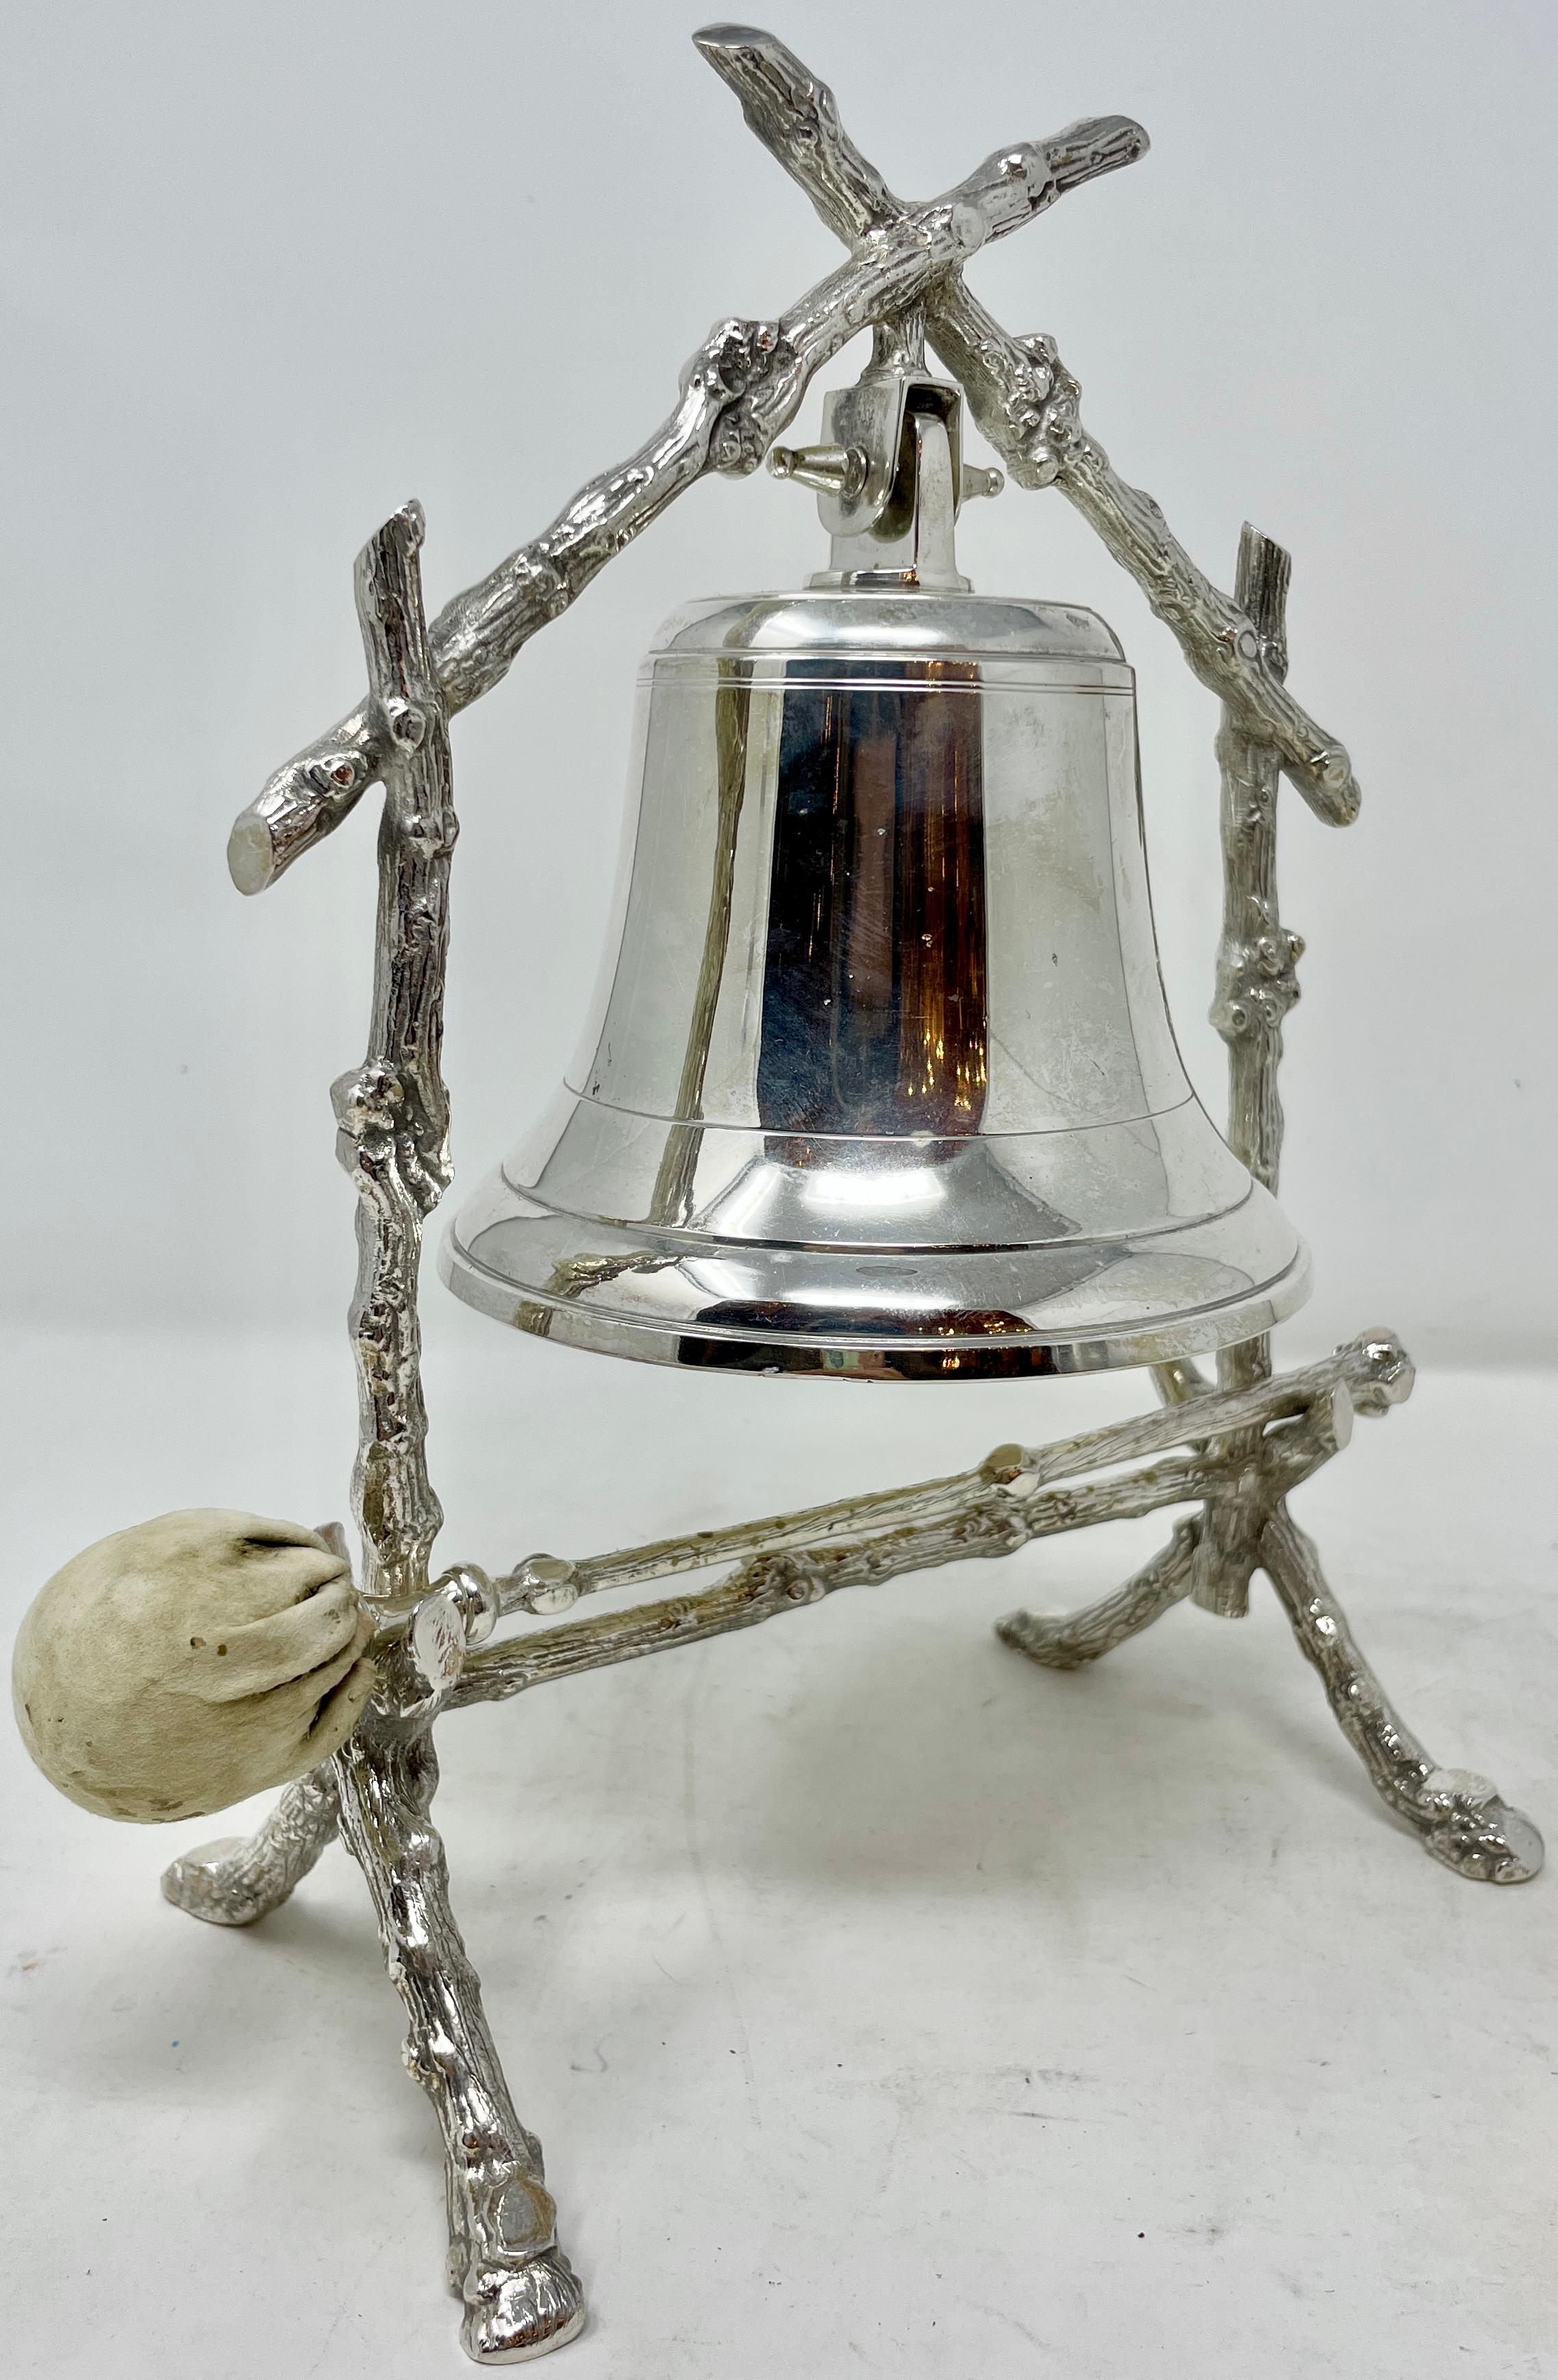 19th Century Antique English Sheffield Silver-Plated Dinner Bell with Striker Circa 1880-1890